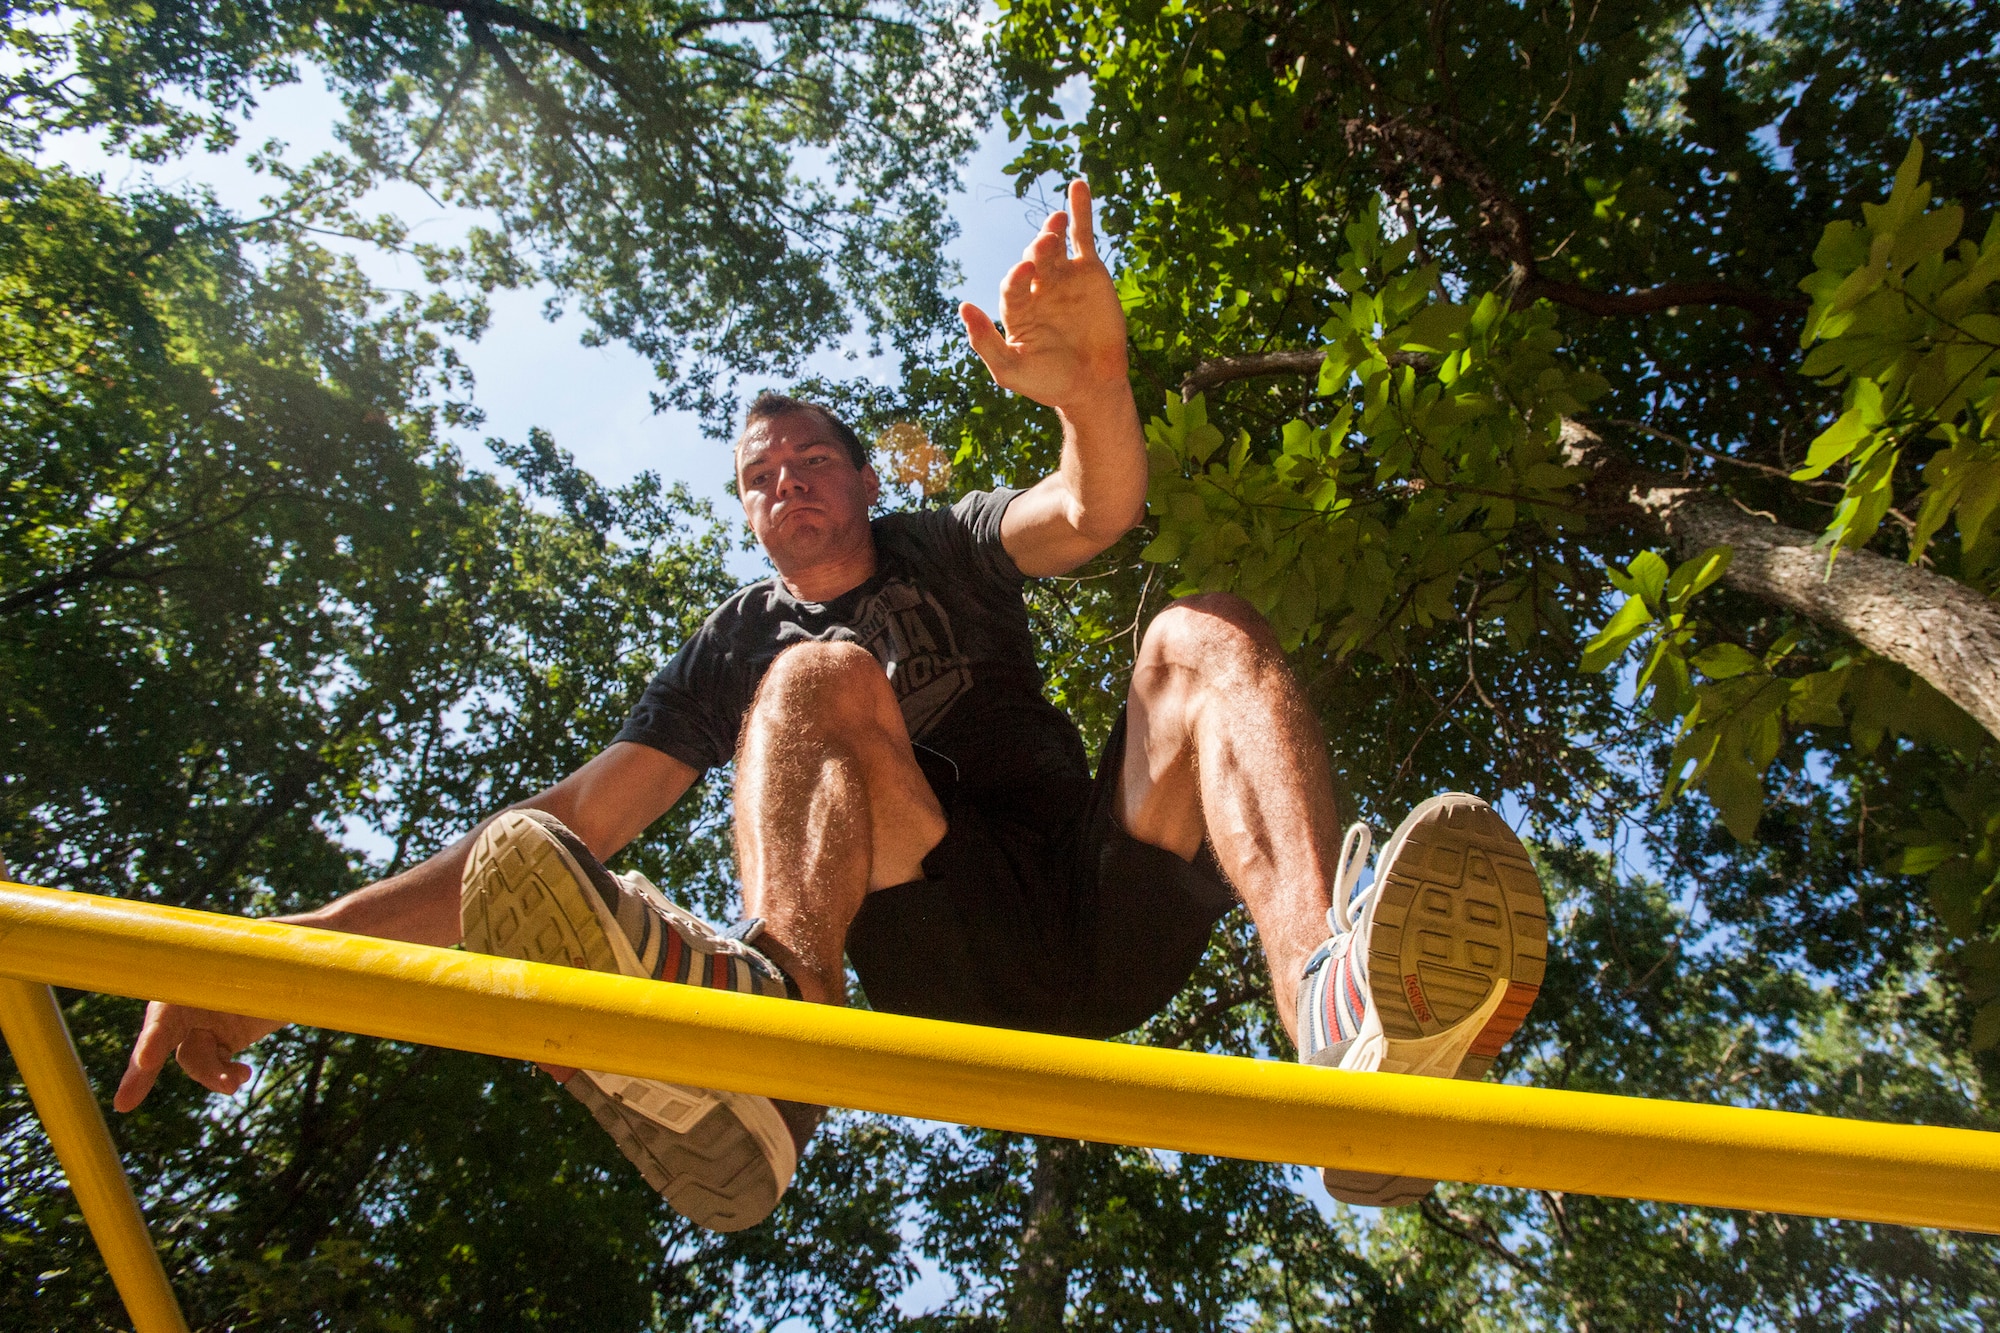 Tech. Sgt. Justin B. Gielski balances on a set of bars he built in the backyard of his home in Medford, N.J.,  as he trains to compete on the TV show “American Ninja Warrior” Aug. 21, 2015. Gielski placed fifth in the all-military city final on the TV show and advanced to the finals in Las Vegas. Gielski is a loadmaster with the 150th Special Operations Squadron, 108th Wing, New Jersey Air National Guard, located at Joint Base McGuire-Dix-Lakehurst, N.J. (U.S. Air National Guard photo by Master Sgt. Mark C. Olsen/Released)